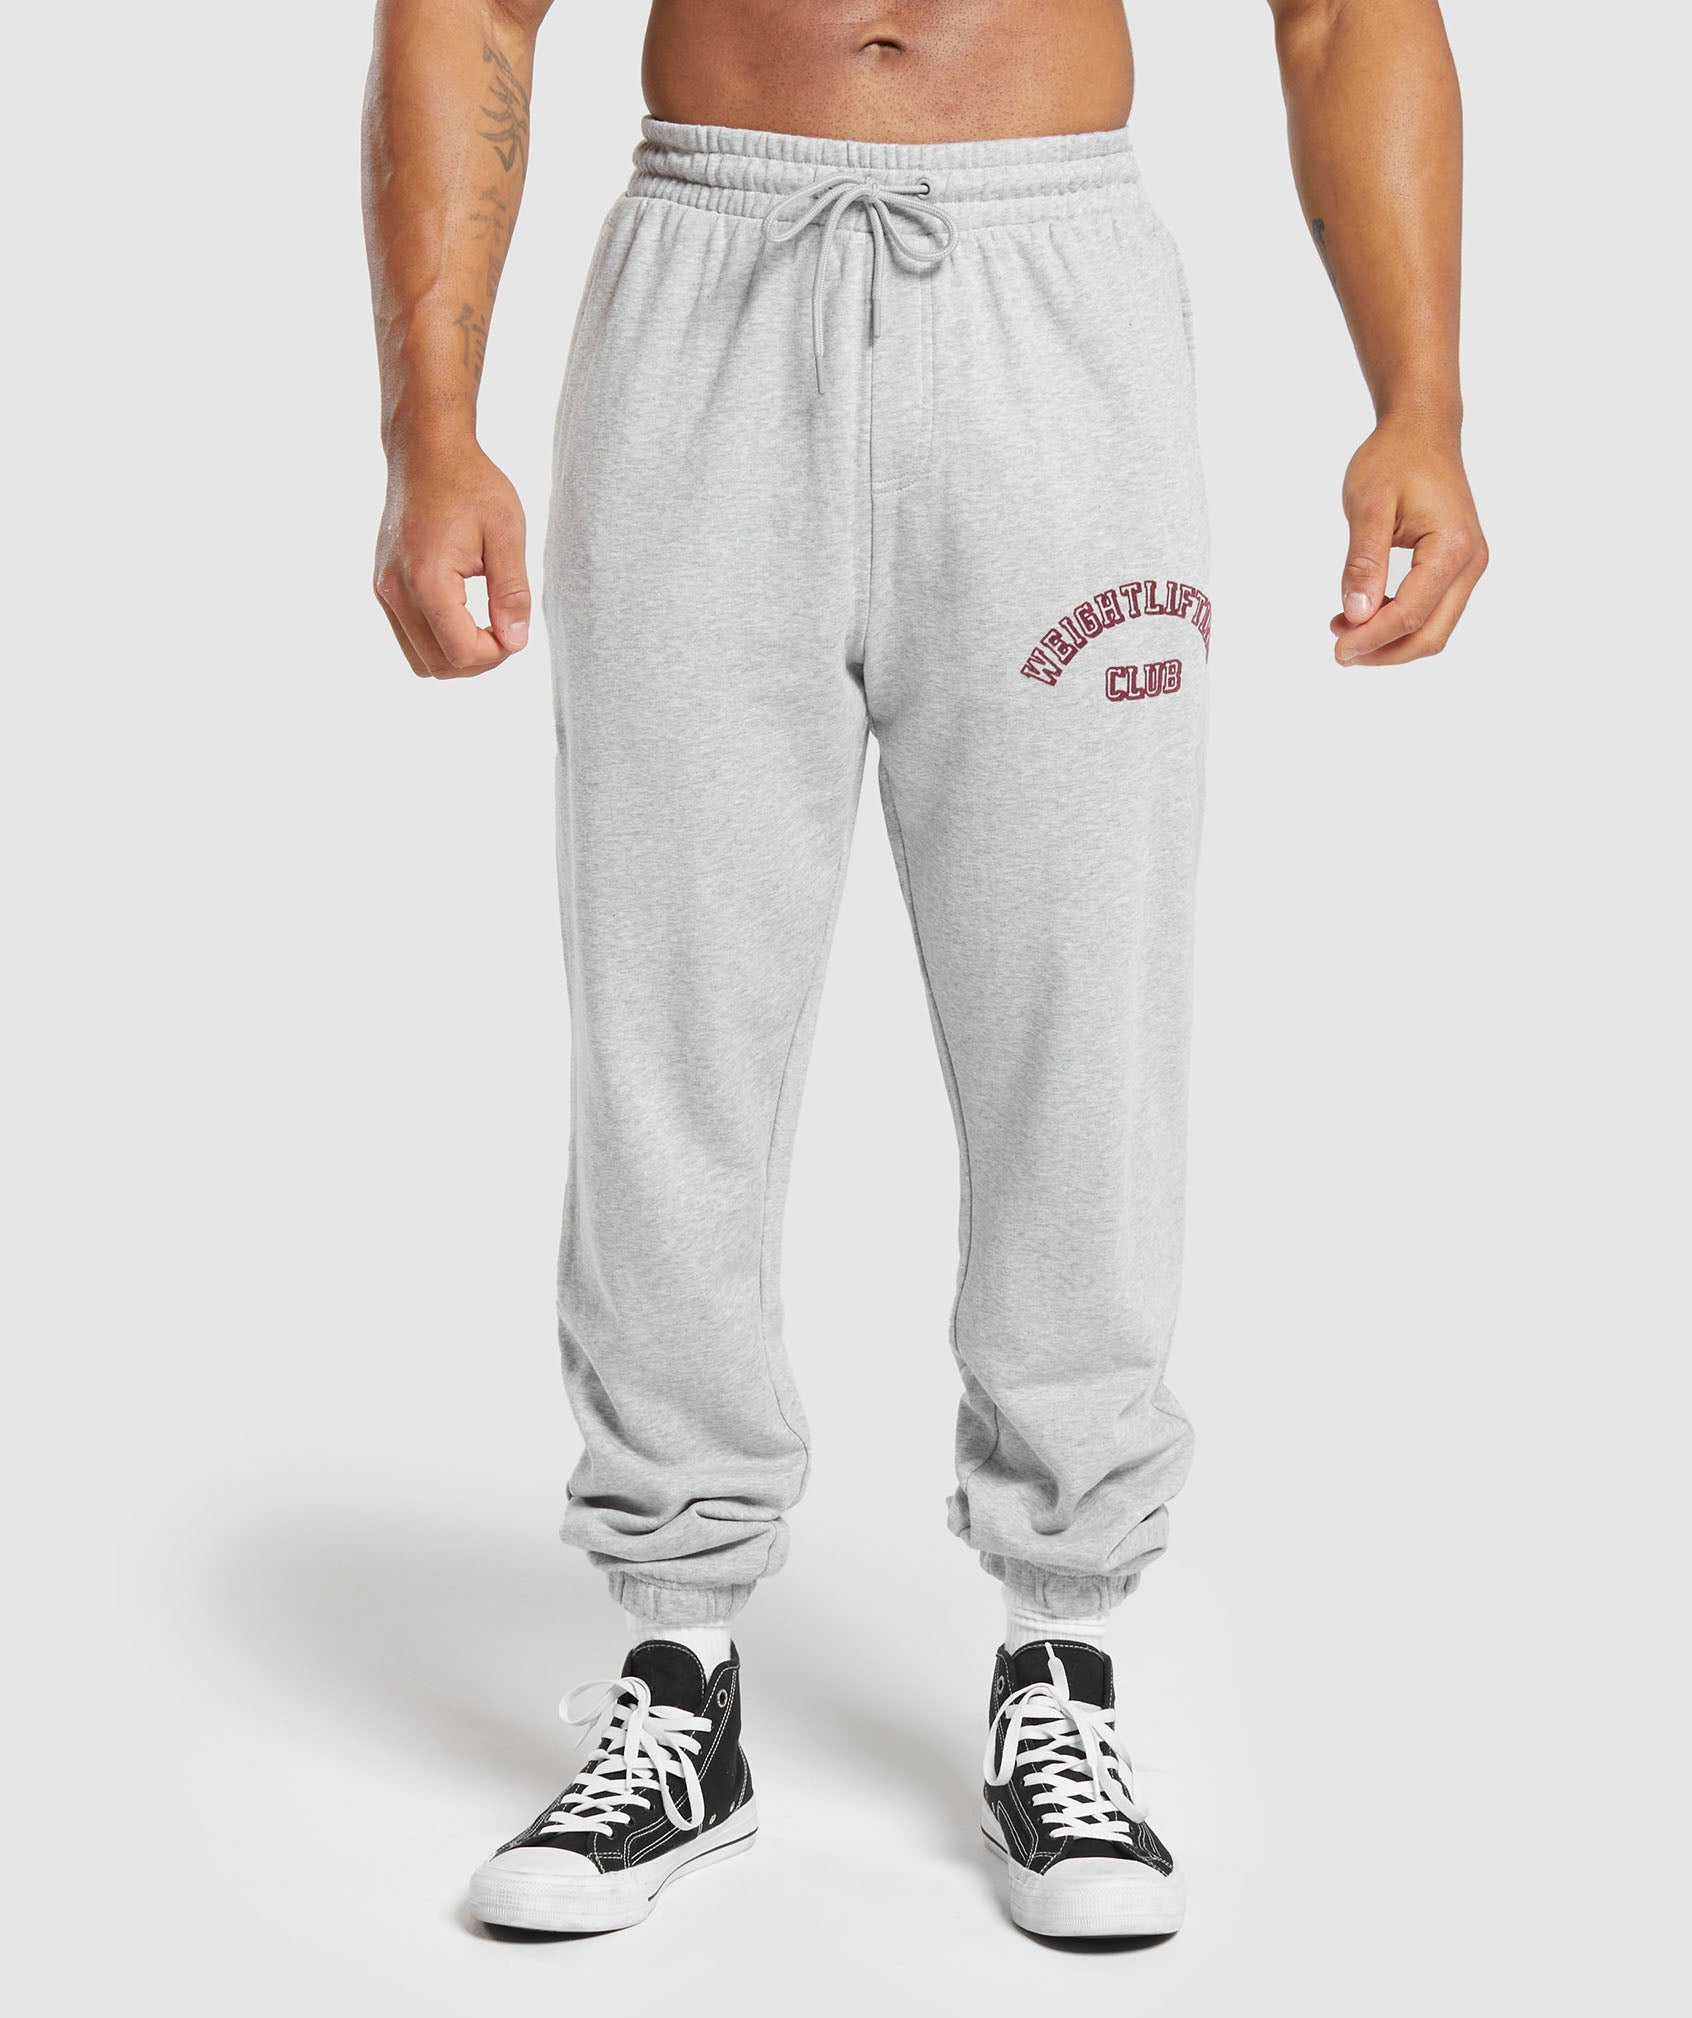 Weightlifting Club Joggers in Light Grey Core Marl - view 1